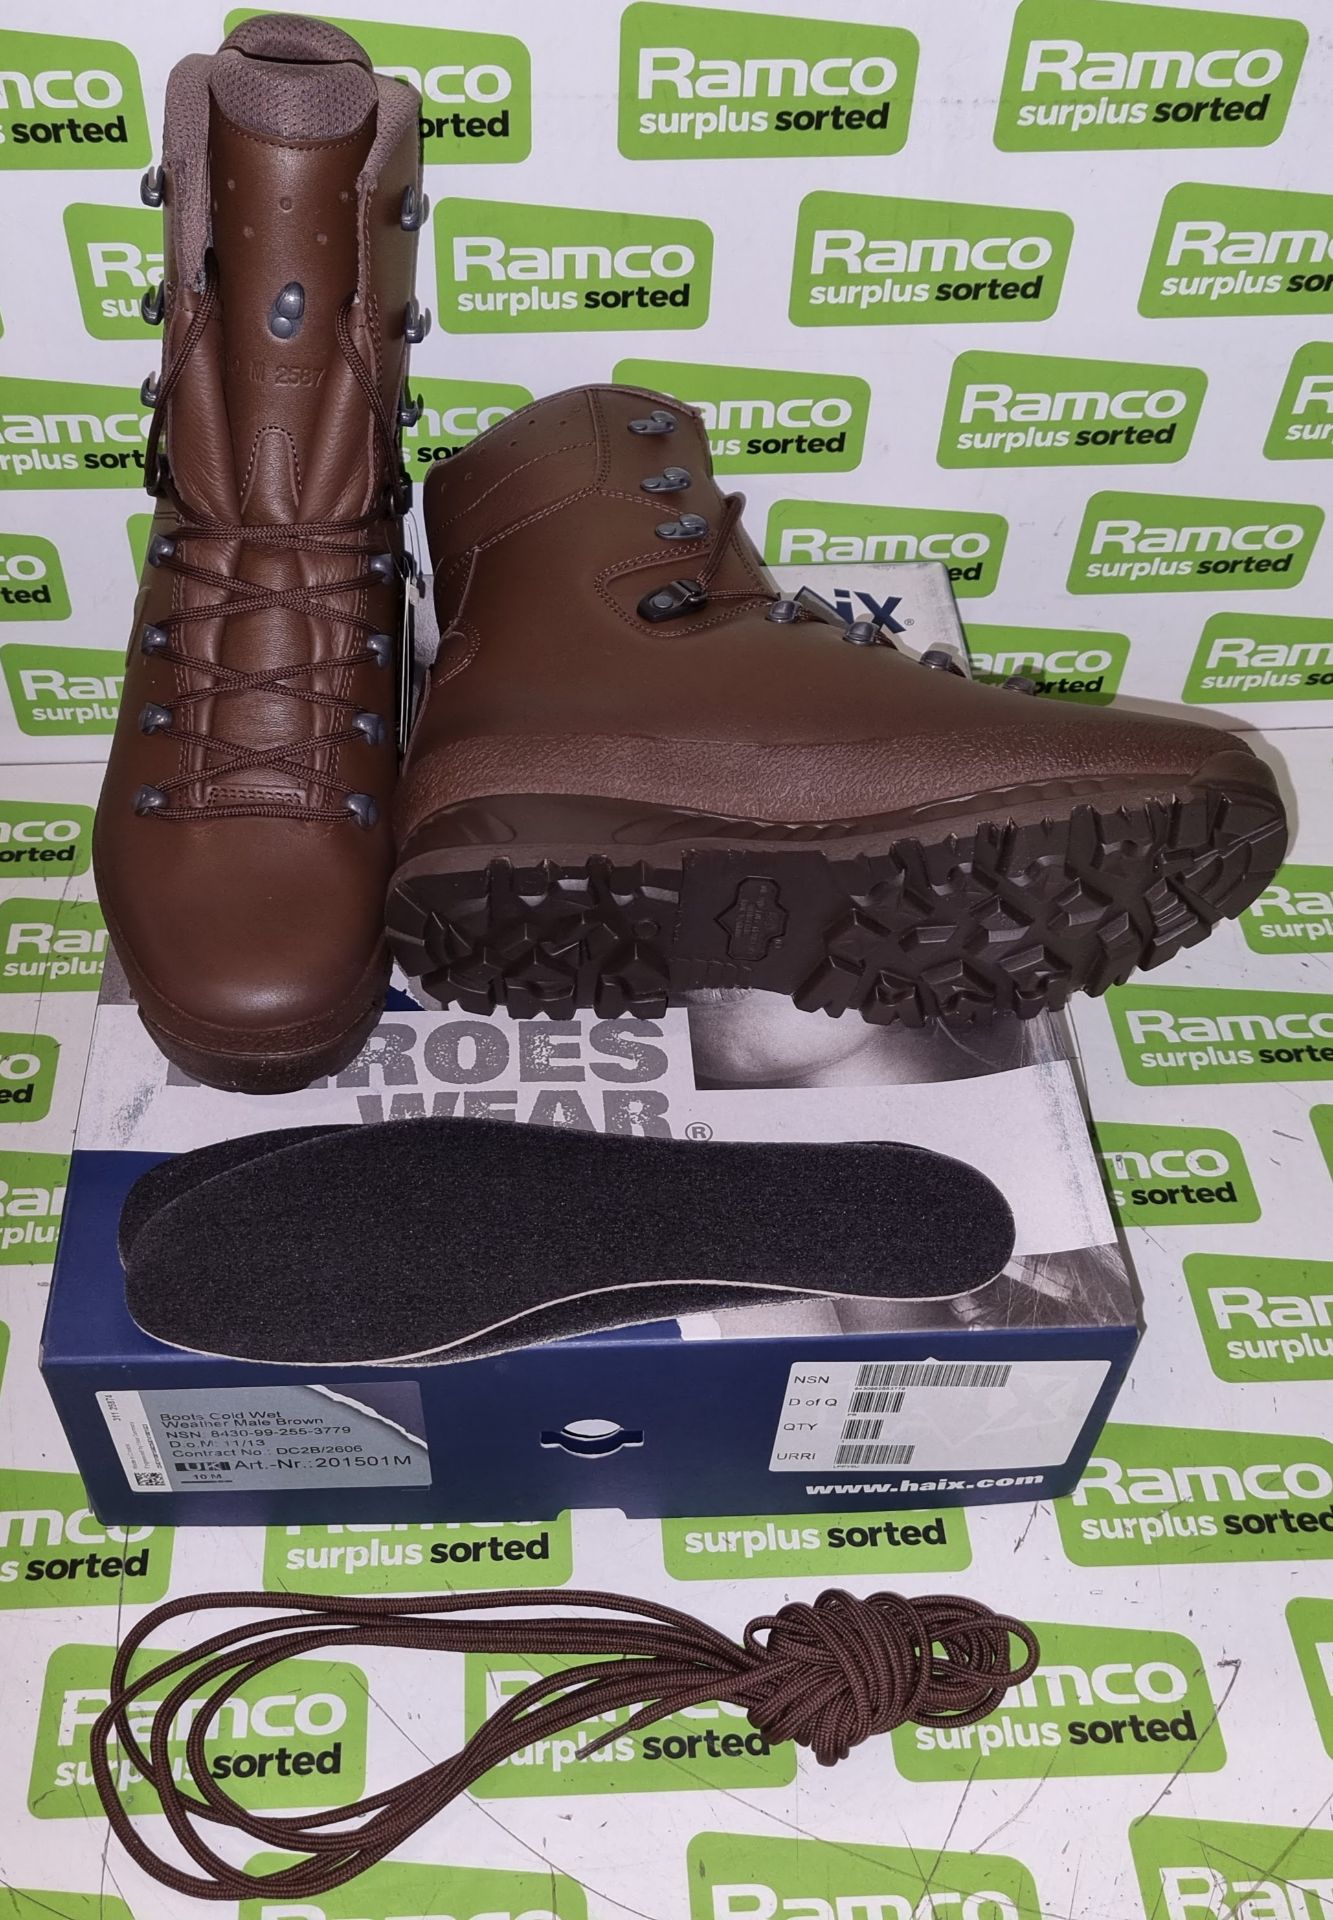 18x pairs of Haix cold wet weather boots - Size 10M